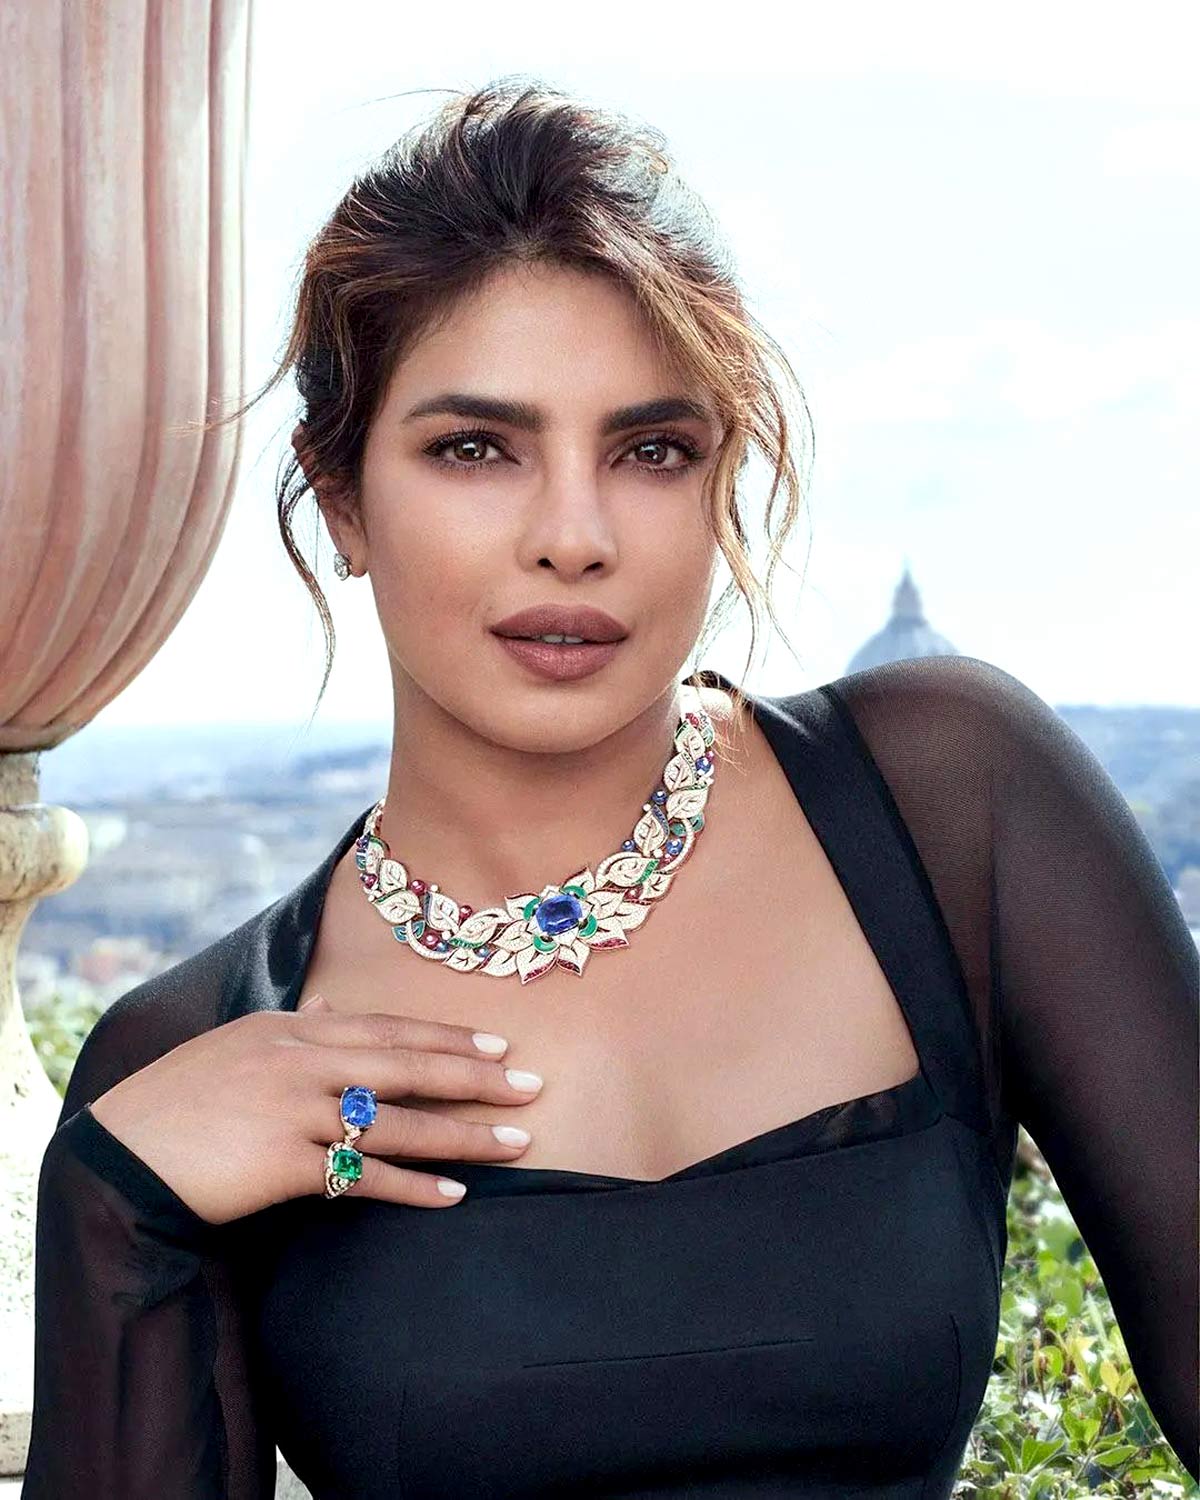 Why Priyanka is UNSTOPPABLE!